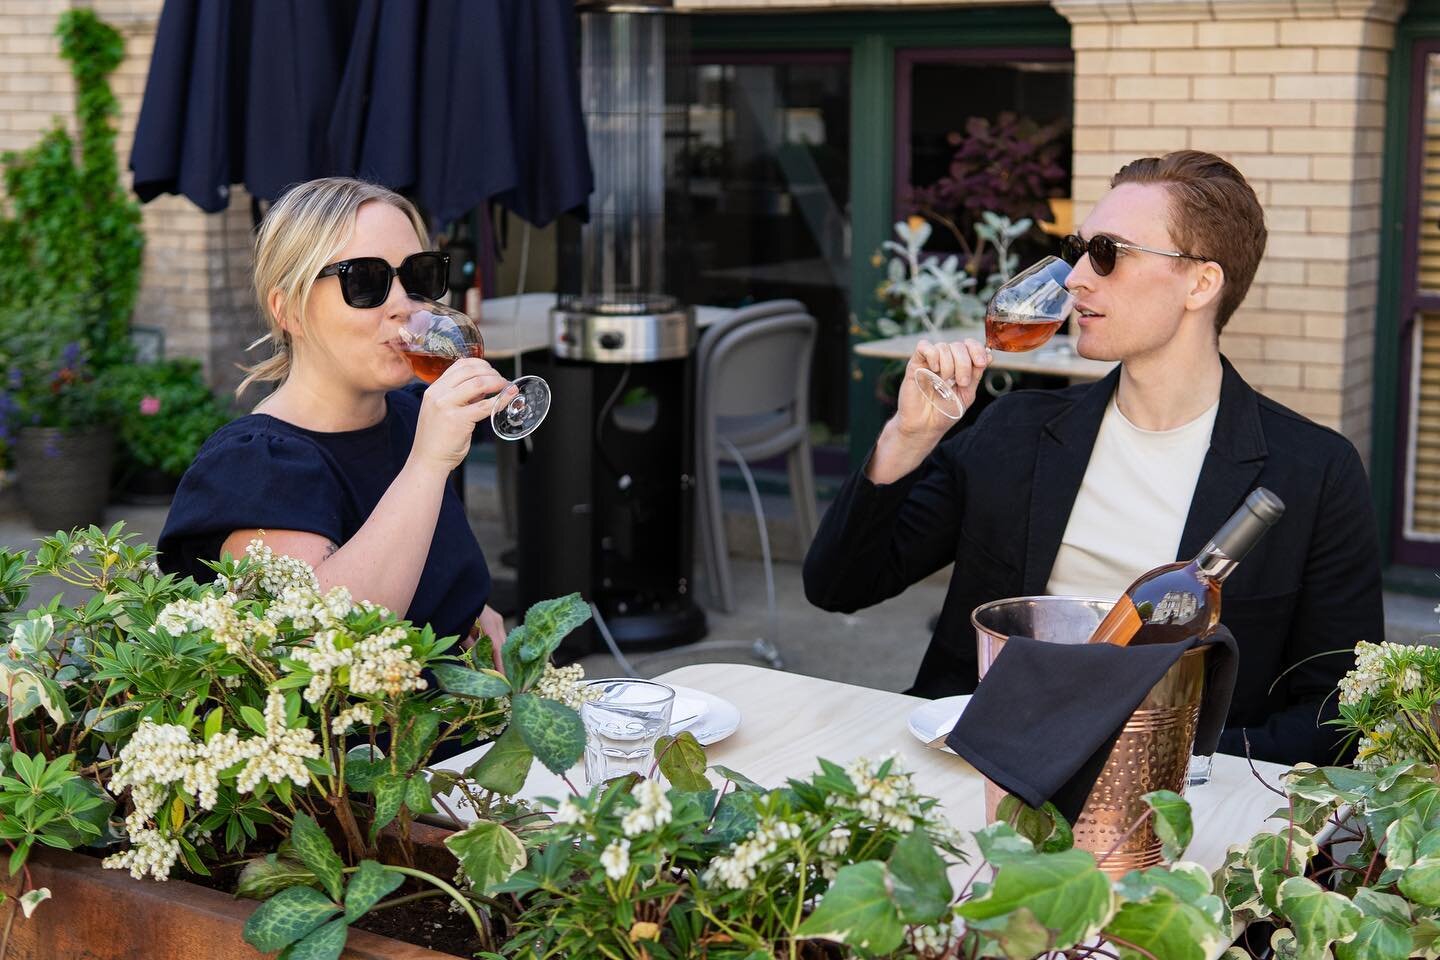 It&rsquo;s patio season, which means it&rsquo;s ros&eacute; season, which means it&rsquo;s the best season. Come and be like these clearly very cool people and drink wine on one of our two patios. Open at 4pm every day.